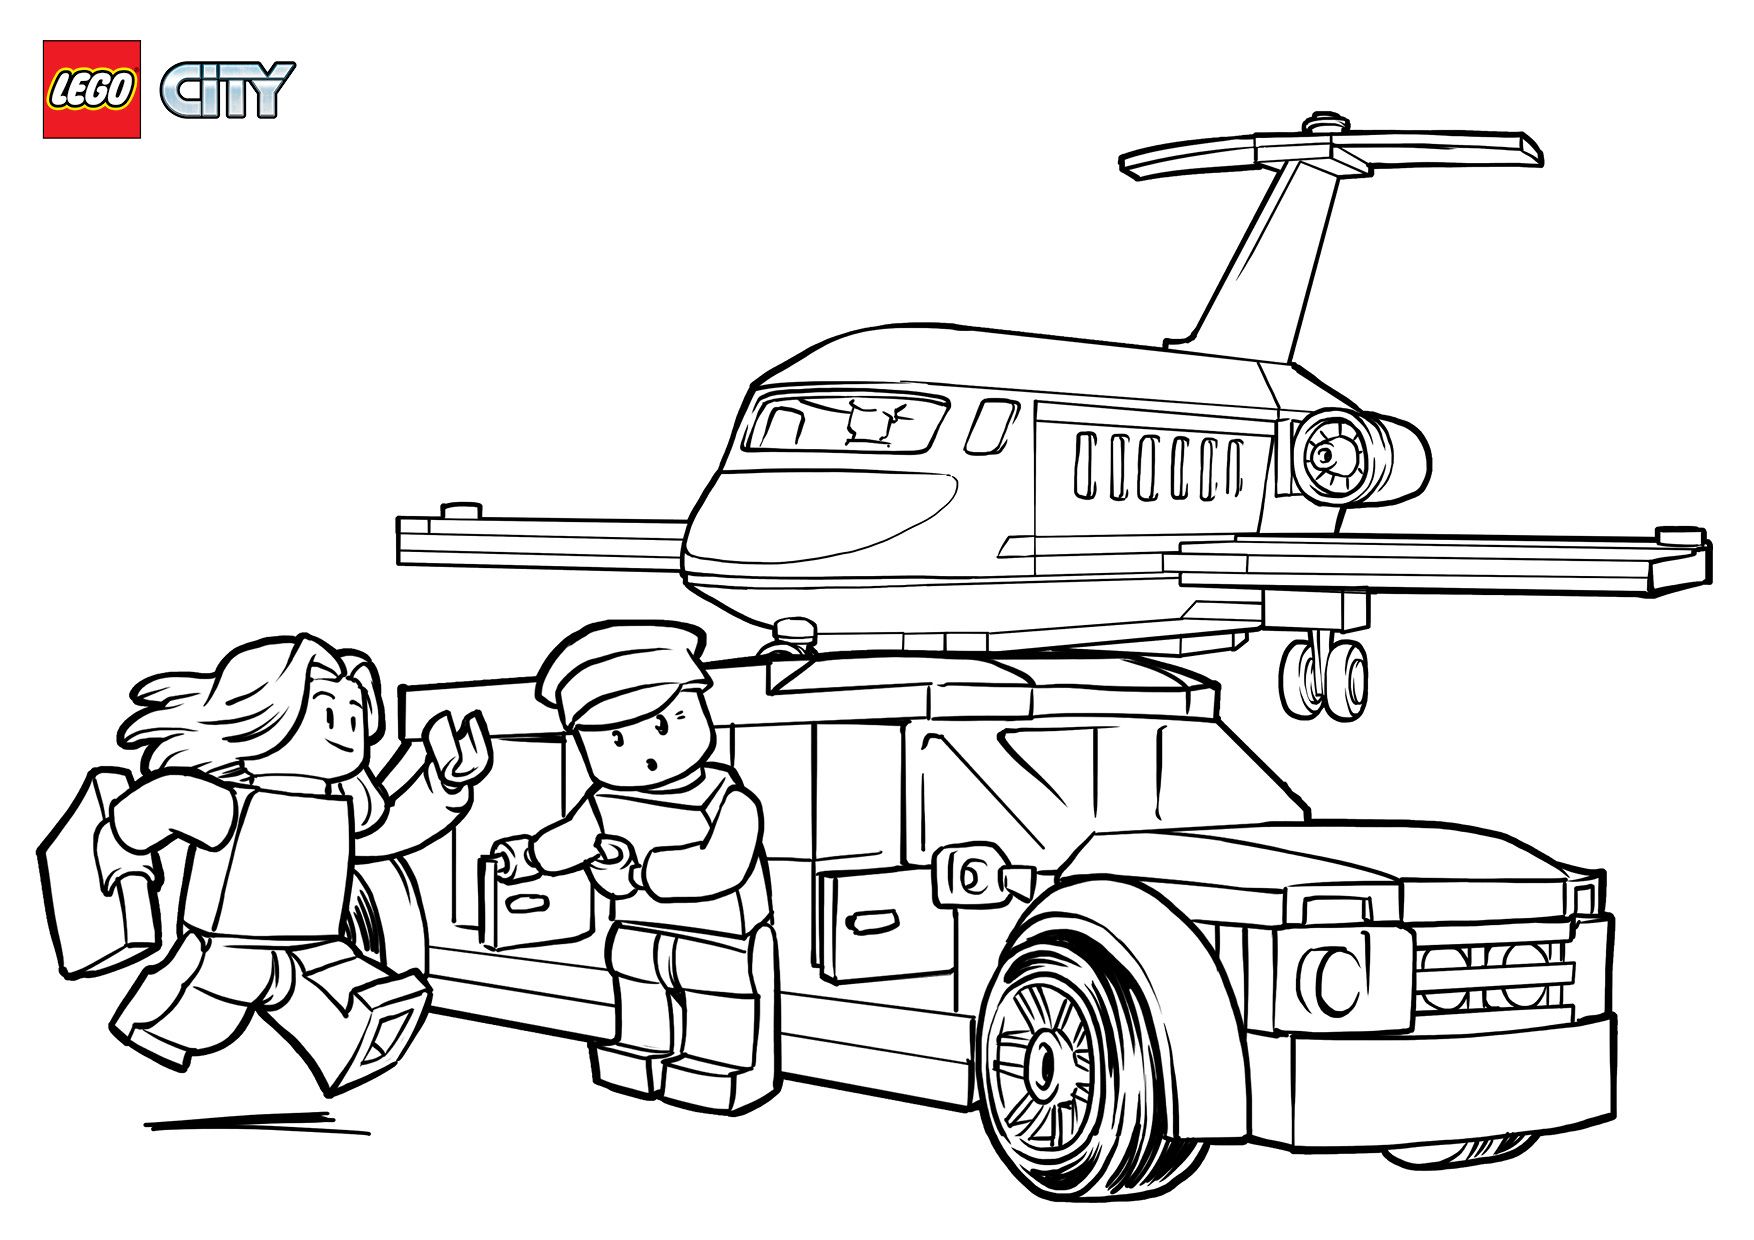 Lego Limo At Airport Coloring Page